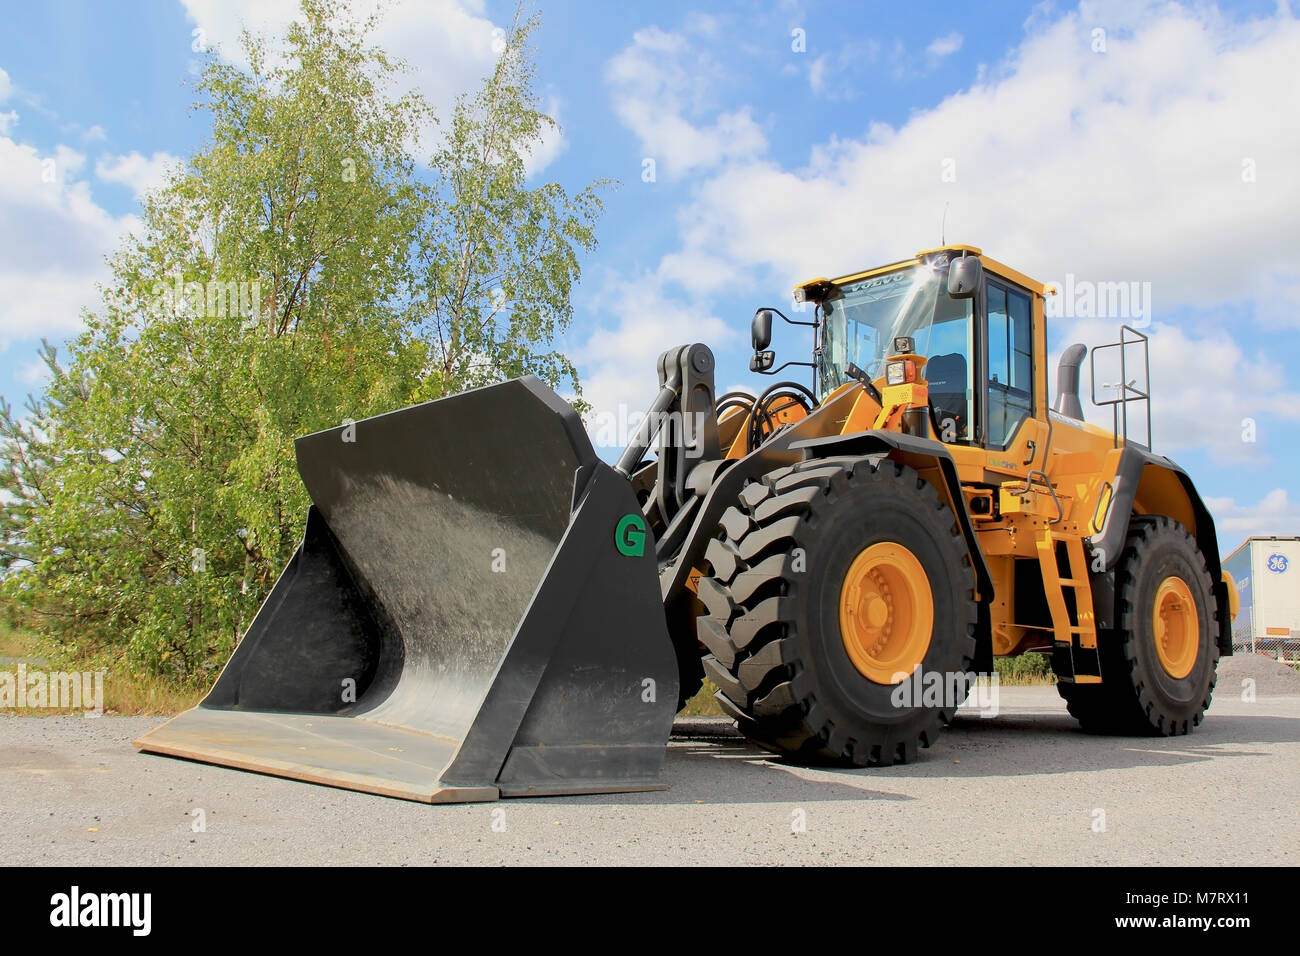 LIETO, FINLAND - AUGUST 3: Volvo L150G Wheel Loader on August 3, 2013 in Lieto, Finland. Volvo CE uses OptiShift technology in larger machinery like   Stock Photo